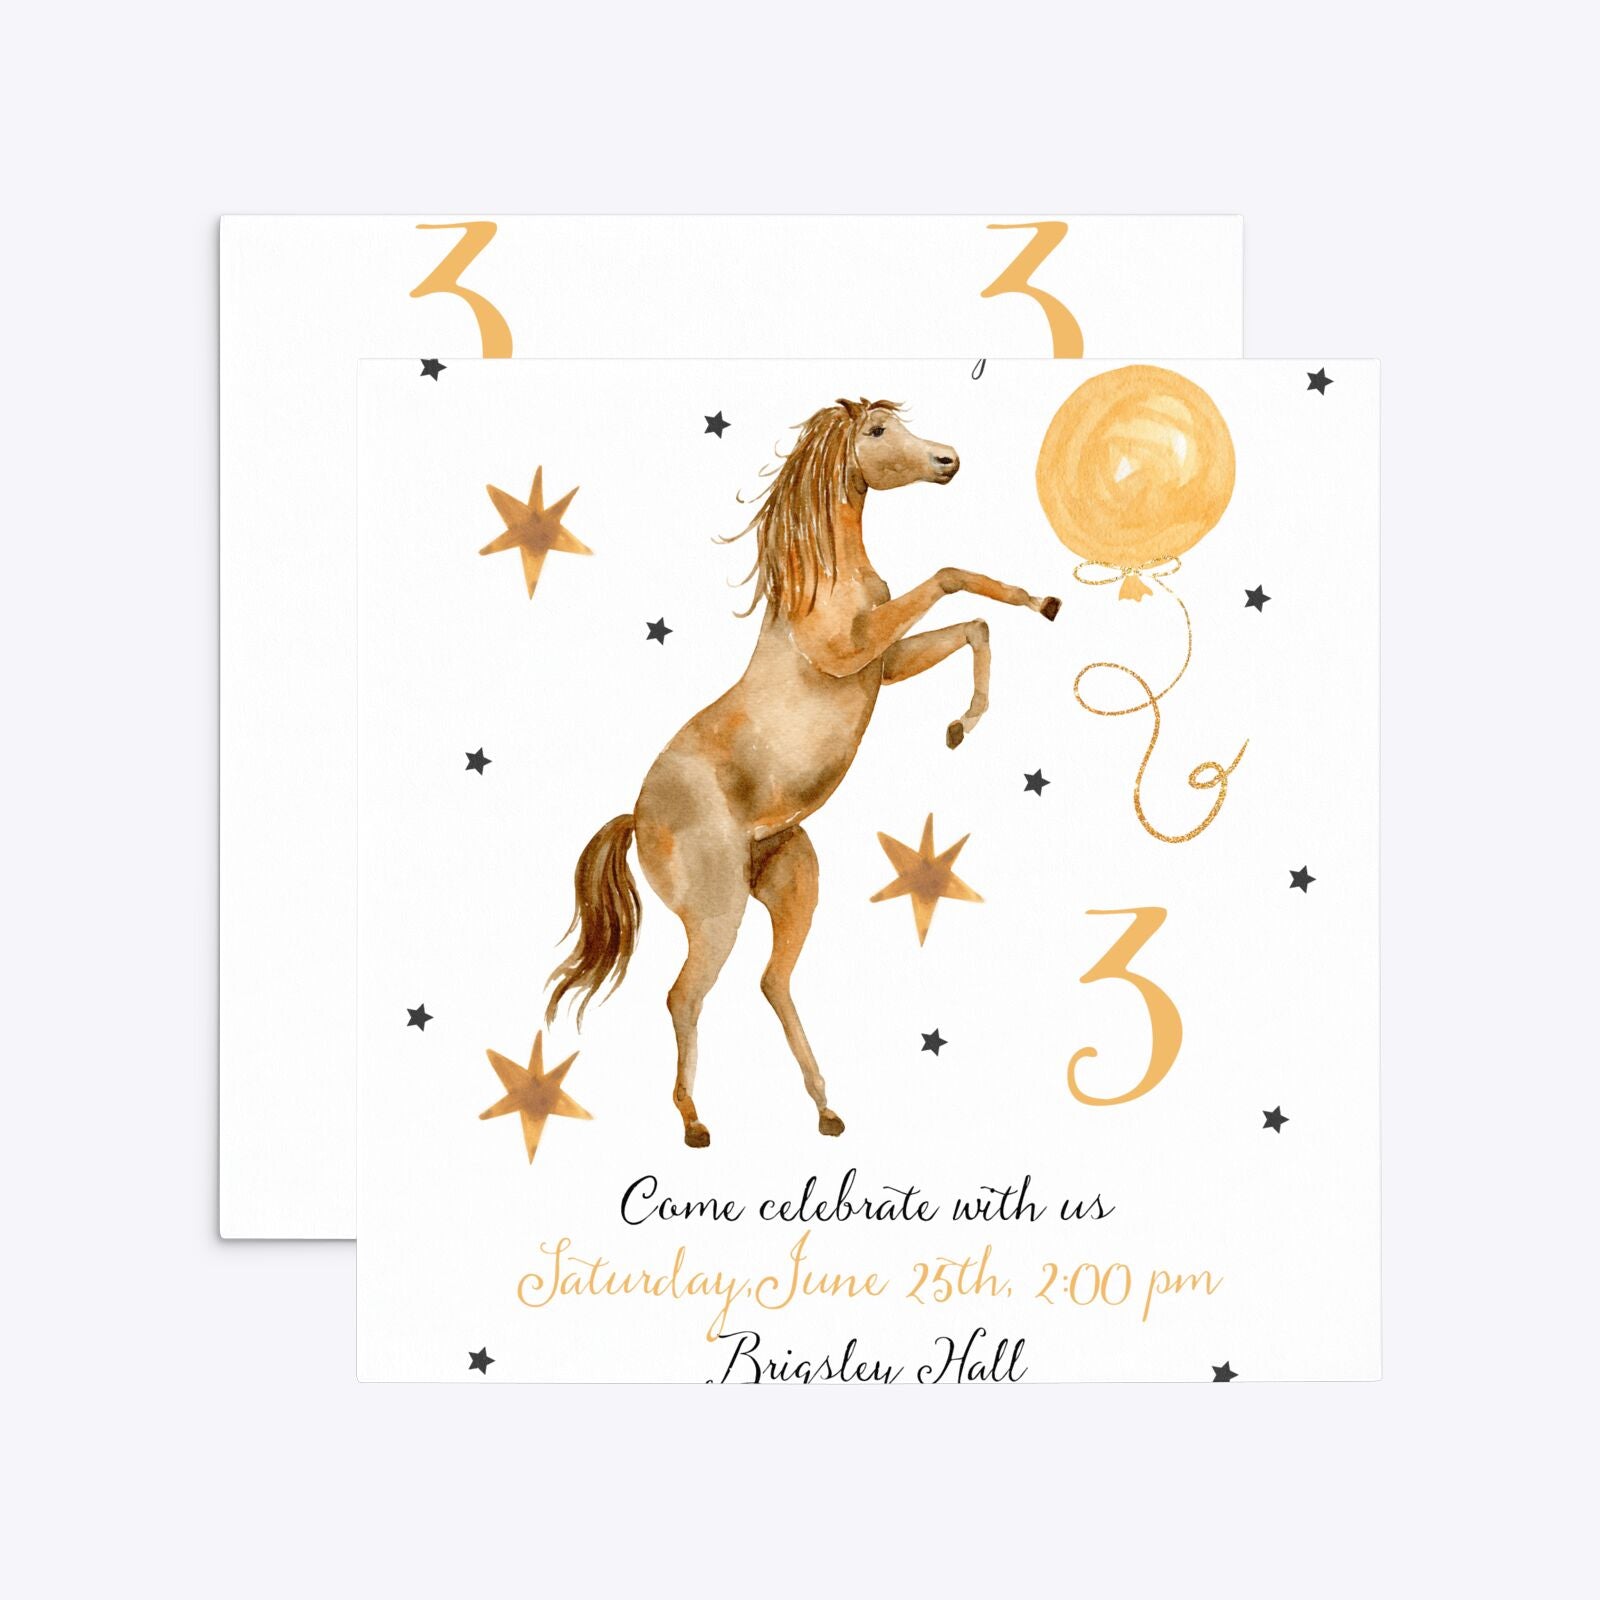 Personalised Horse Happy Birthday Square 5 25x5 25 Invitation Matte Paper Front and Back Image